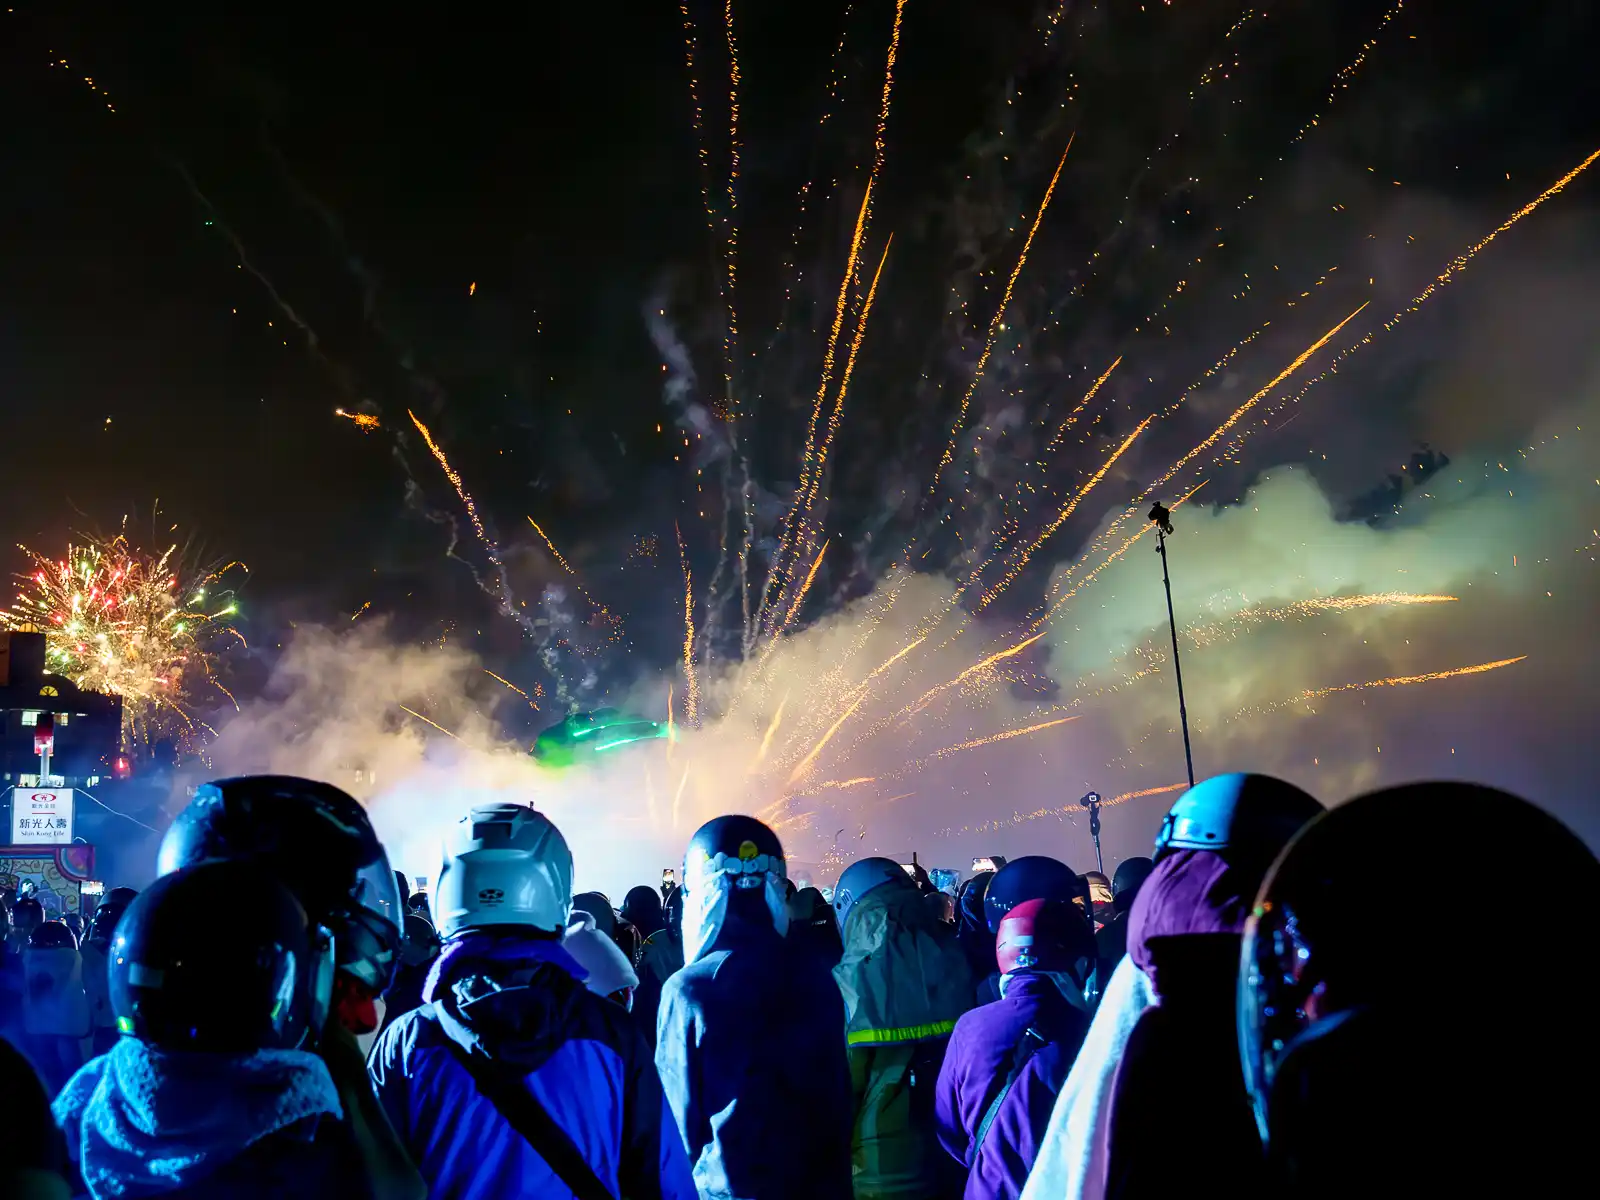 A barrage of fireworks is erupting and shooting both up and into the crowd as well as the camera.